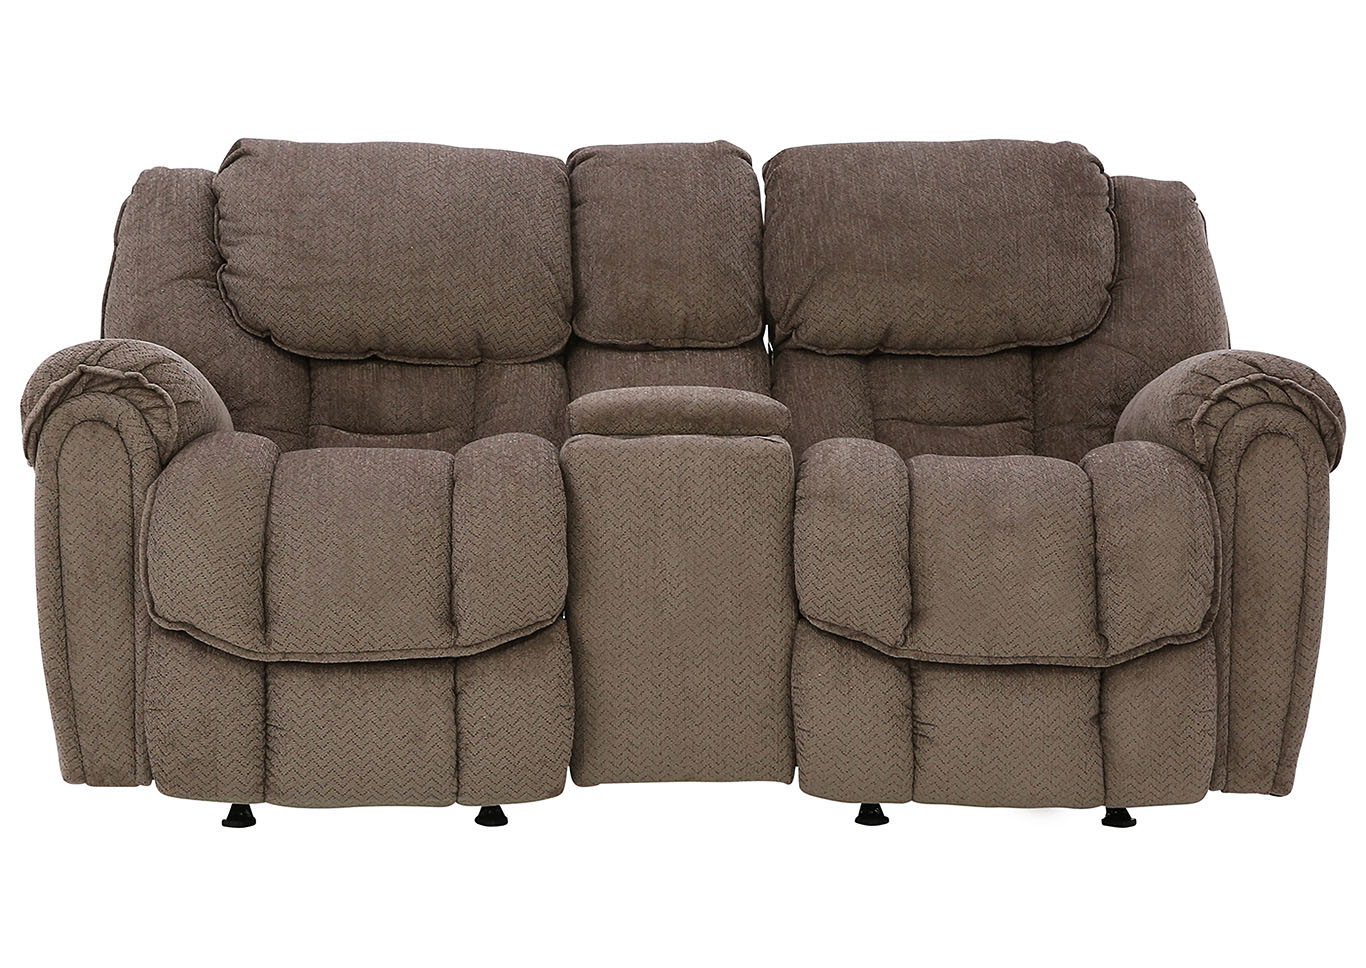 BAXTER TAUPE RECLINING LOVESEAT WITH CONSOLE,HOMESTRETCH